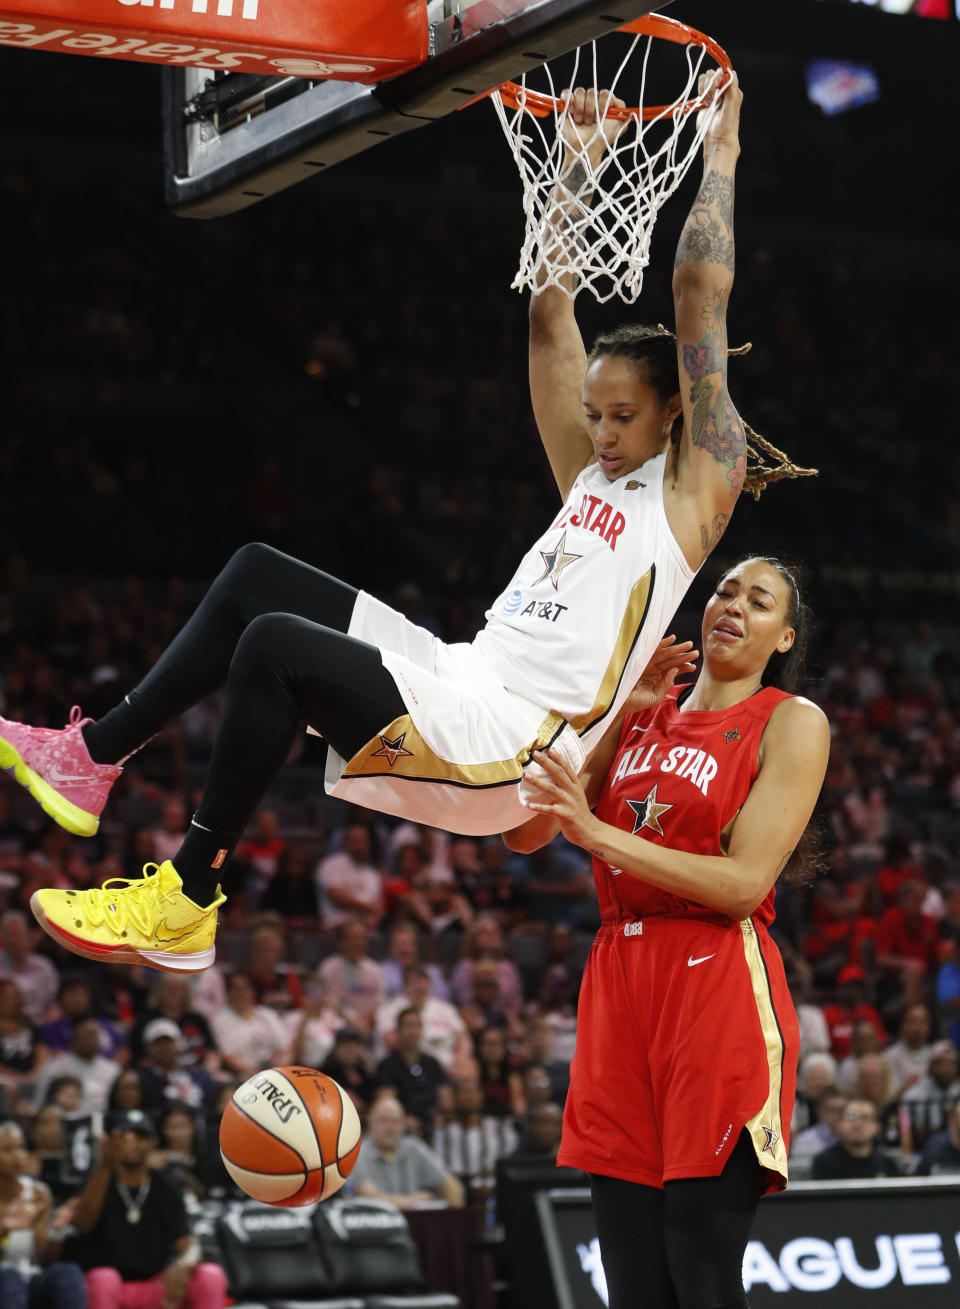 Phoenix Mercury's Brittney Griner, of Team Delle Donne, dunks over Las Vegas Aces' Liz Cambage, of Team Wilson, during the first half of a WNBA All-Star game Saturday, July 27, 2019, in Las Vegas. (AP Photo/John Locher)